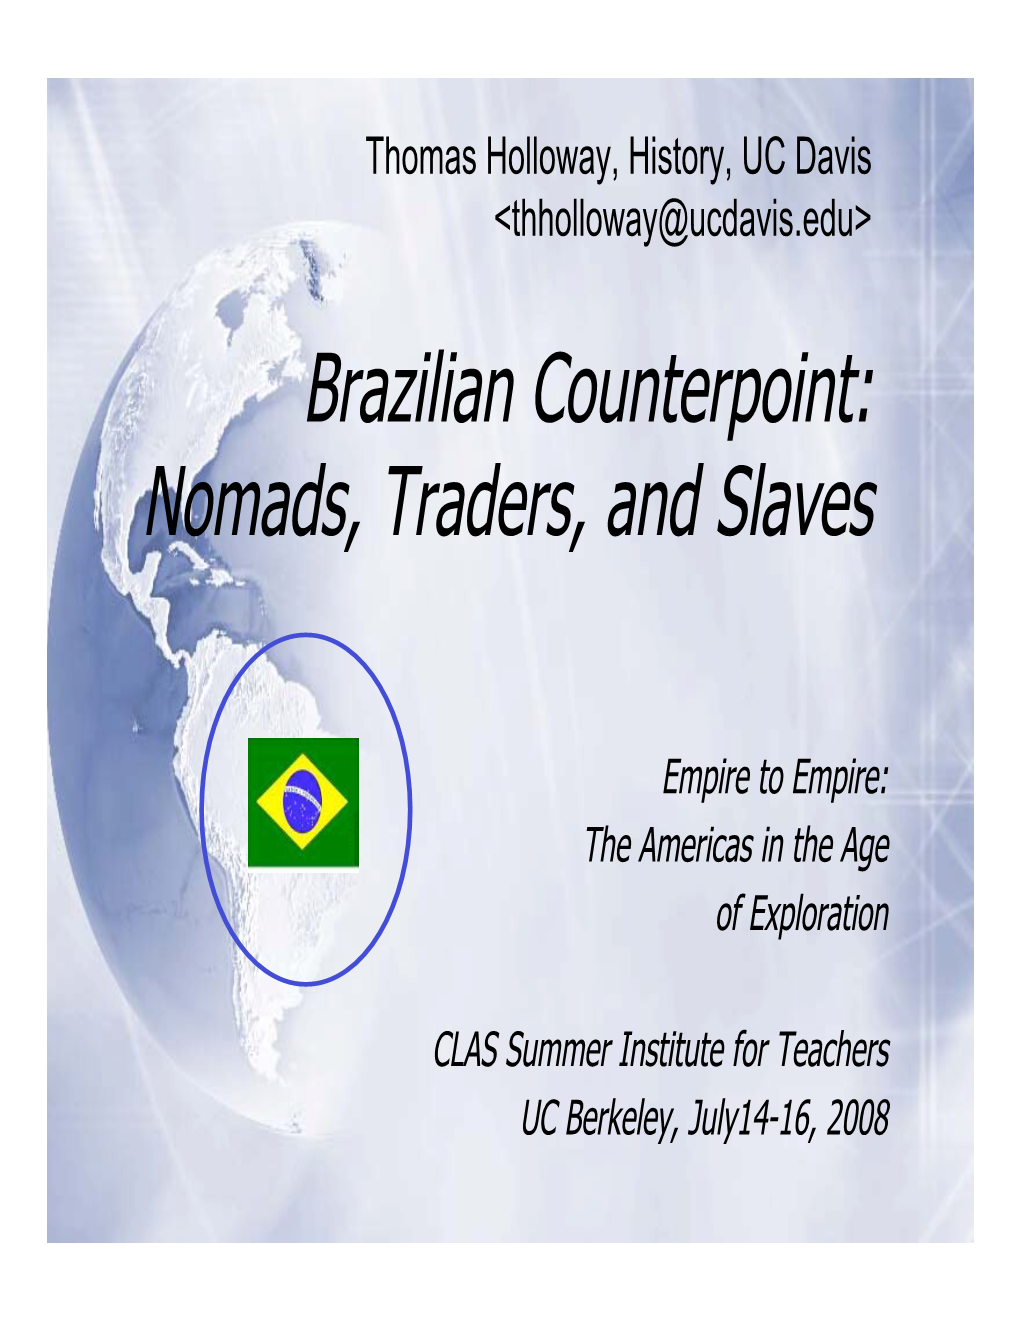 Brazilian Counterpoint: Nomads, Traders, and Slaves